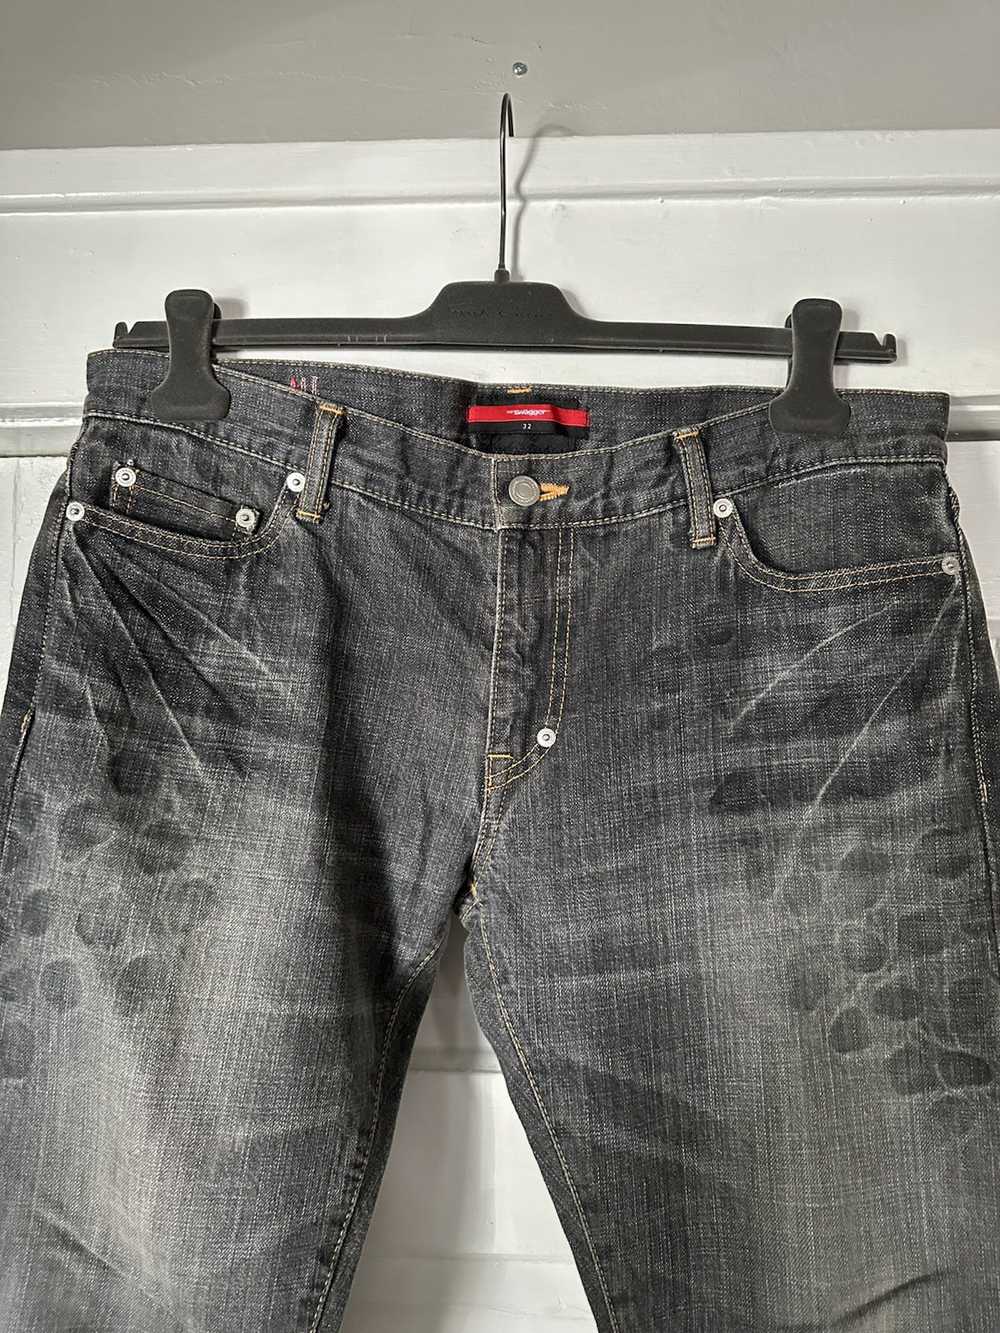 Swagger Swagger $32 Reptile Denim Jeans - image 3